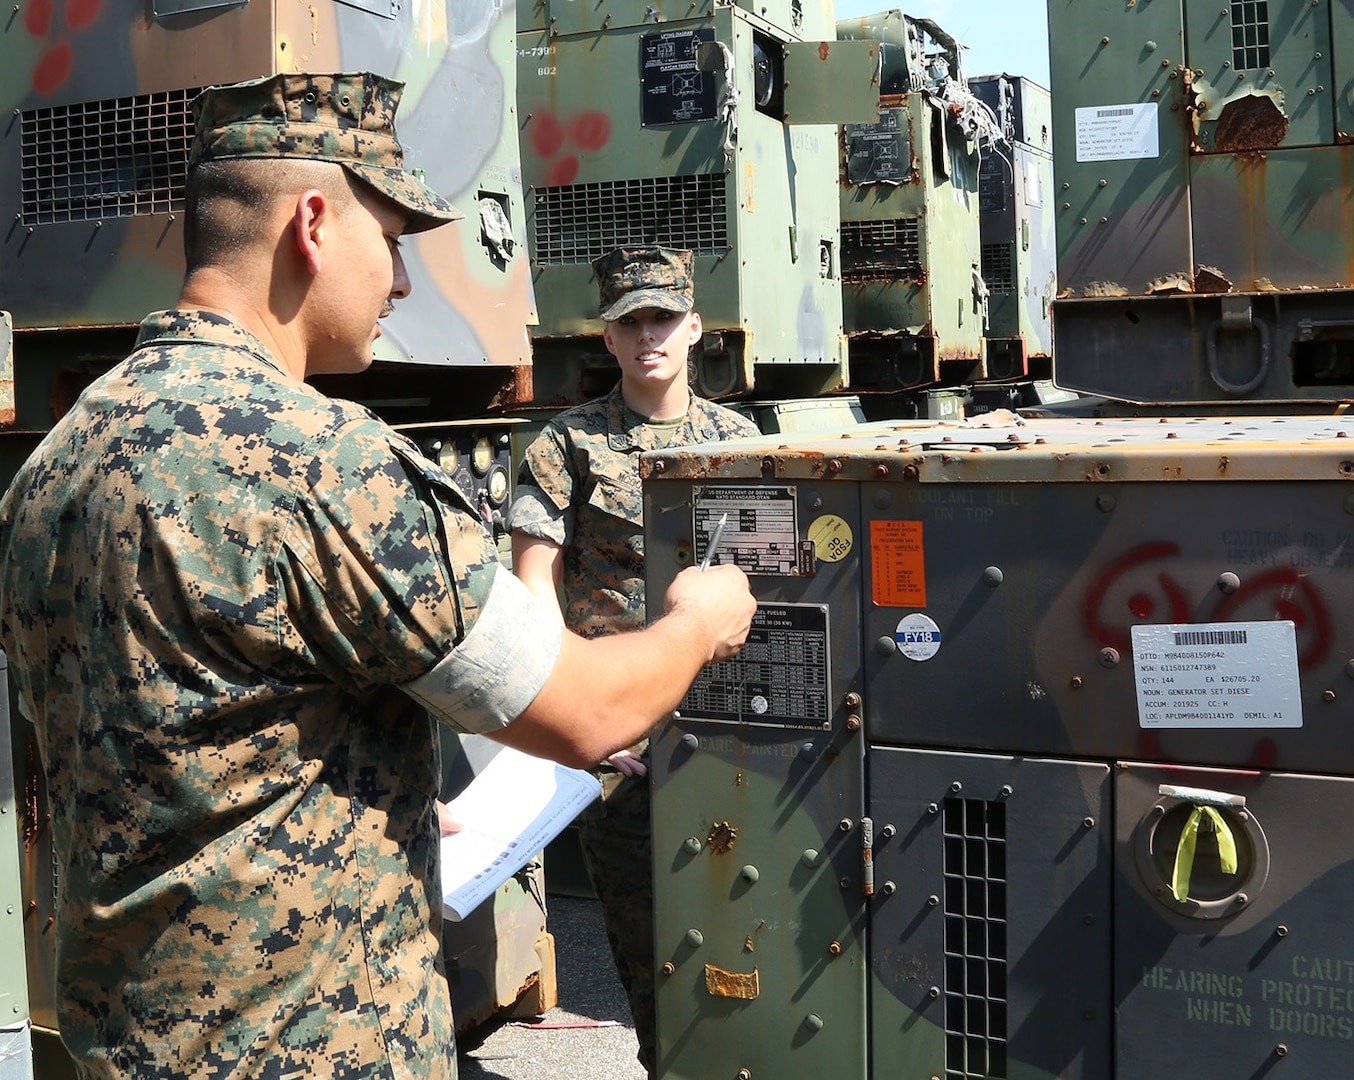 Gunnery Sgt. Michael E. Longoria, left and Sgt. Devin H. McGowan, both assigned to Marine Force Storage Command, inventory generators selected for disposition at Marine Corps Logistics Base Albany, Georgia, August 2019.  The obsolete generators are among the approximately 109,000 pieces of military equipment that Marine Corps Logistics Command will divest or redistribute as part of the Marine Corps’ Equipment Optimization Plan.